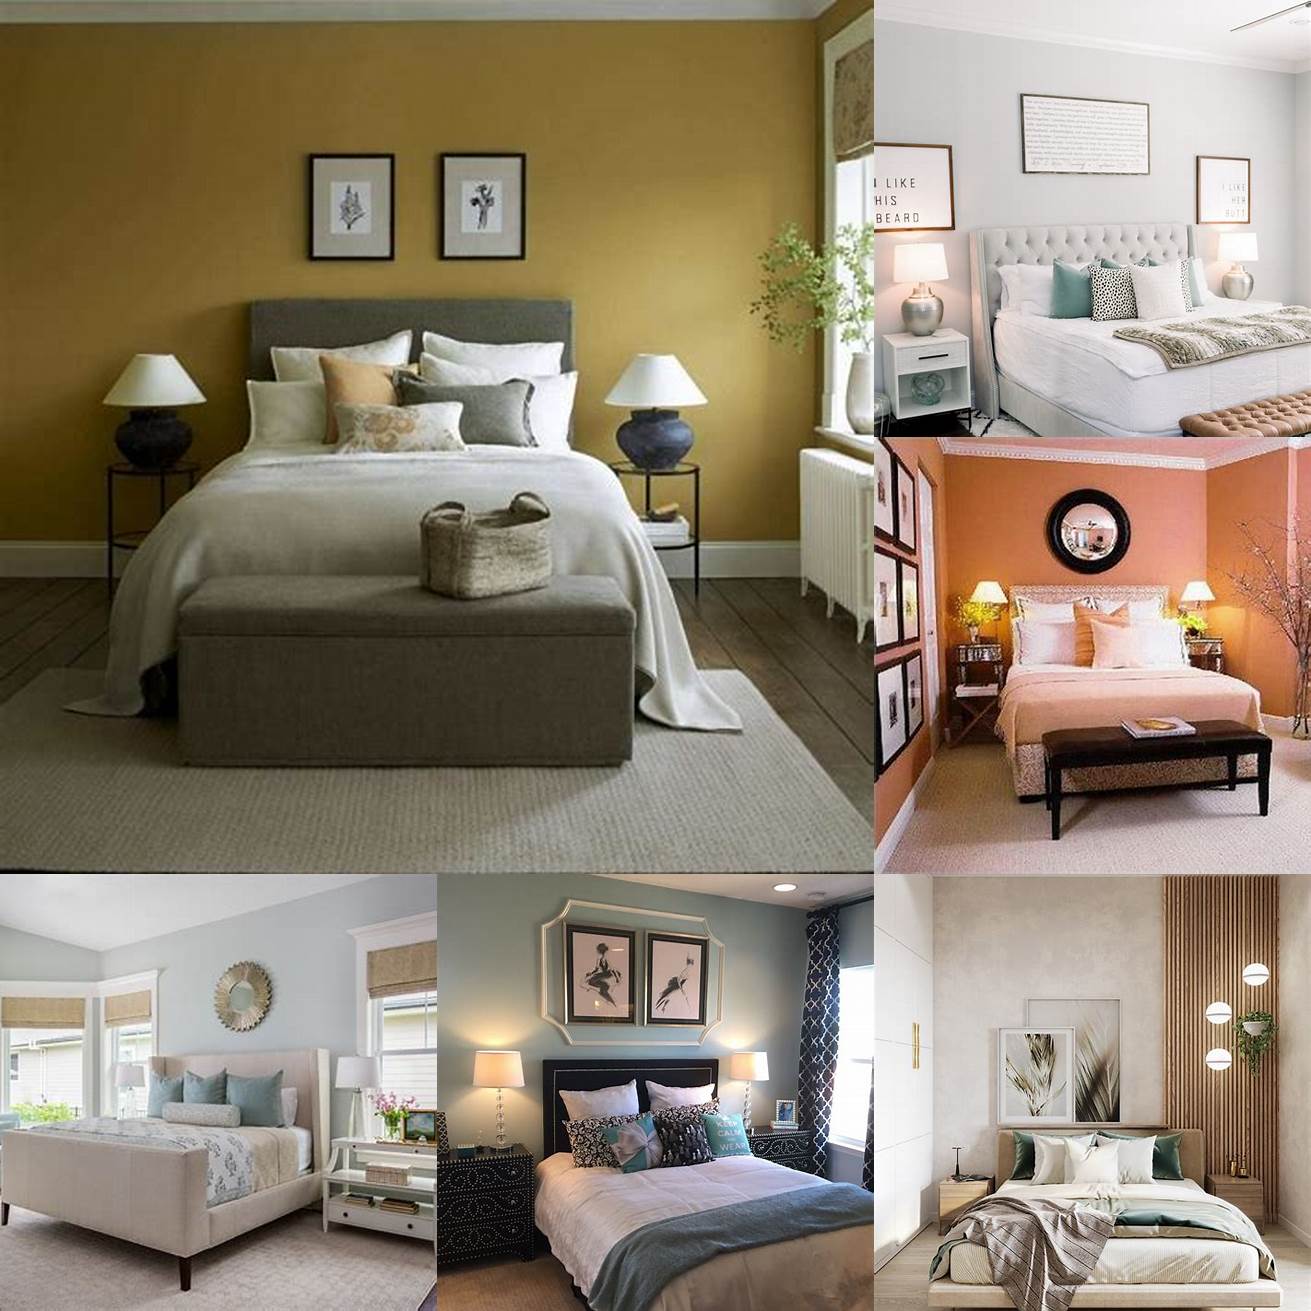 A beige bedroom can create a calming and relaxing atmosphere